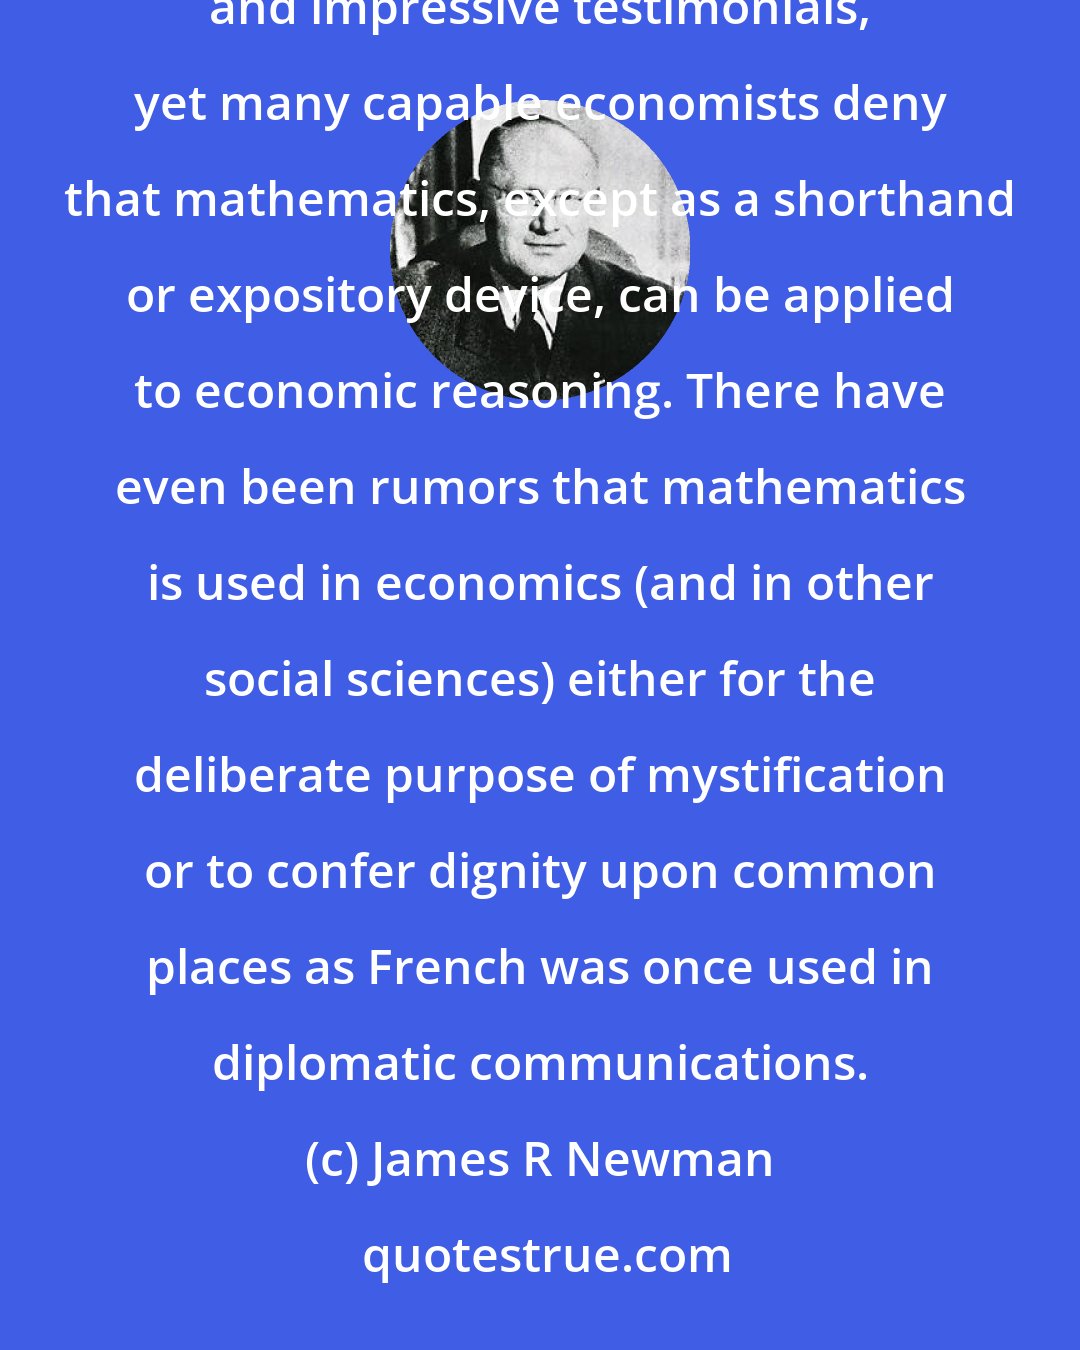 James R Newman: Mathematical economics is old enough to be respectable, but not all economists respect it. It has powerful supporters and impressive testimonials, yet many capable economists deny that mathematics, except as a shorthand or expository device, can be applied to economic reasoning. There have even been rumors that mathematics is used in economics (and in other social sciences) either for the deliberate purpose of mystification or to confer dignity upon common places as French was once used in diplomatic communications.